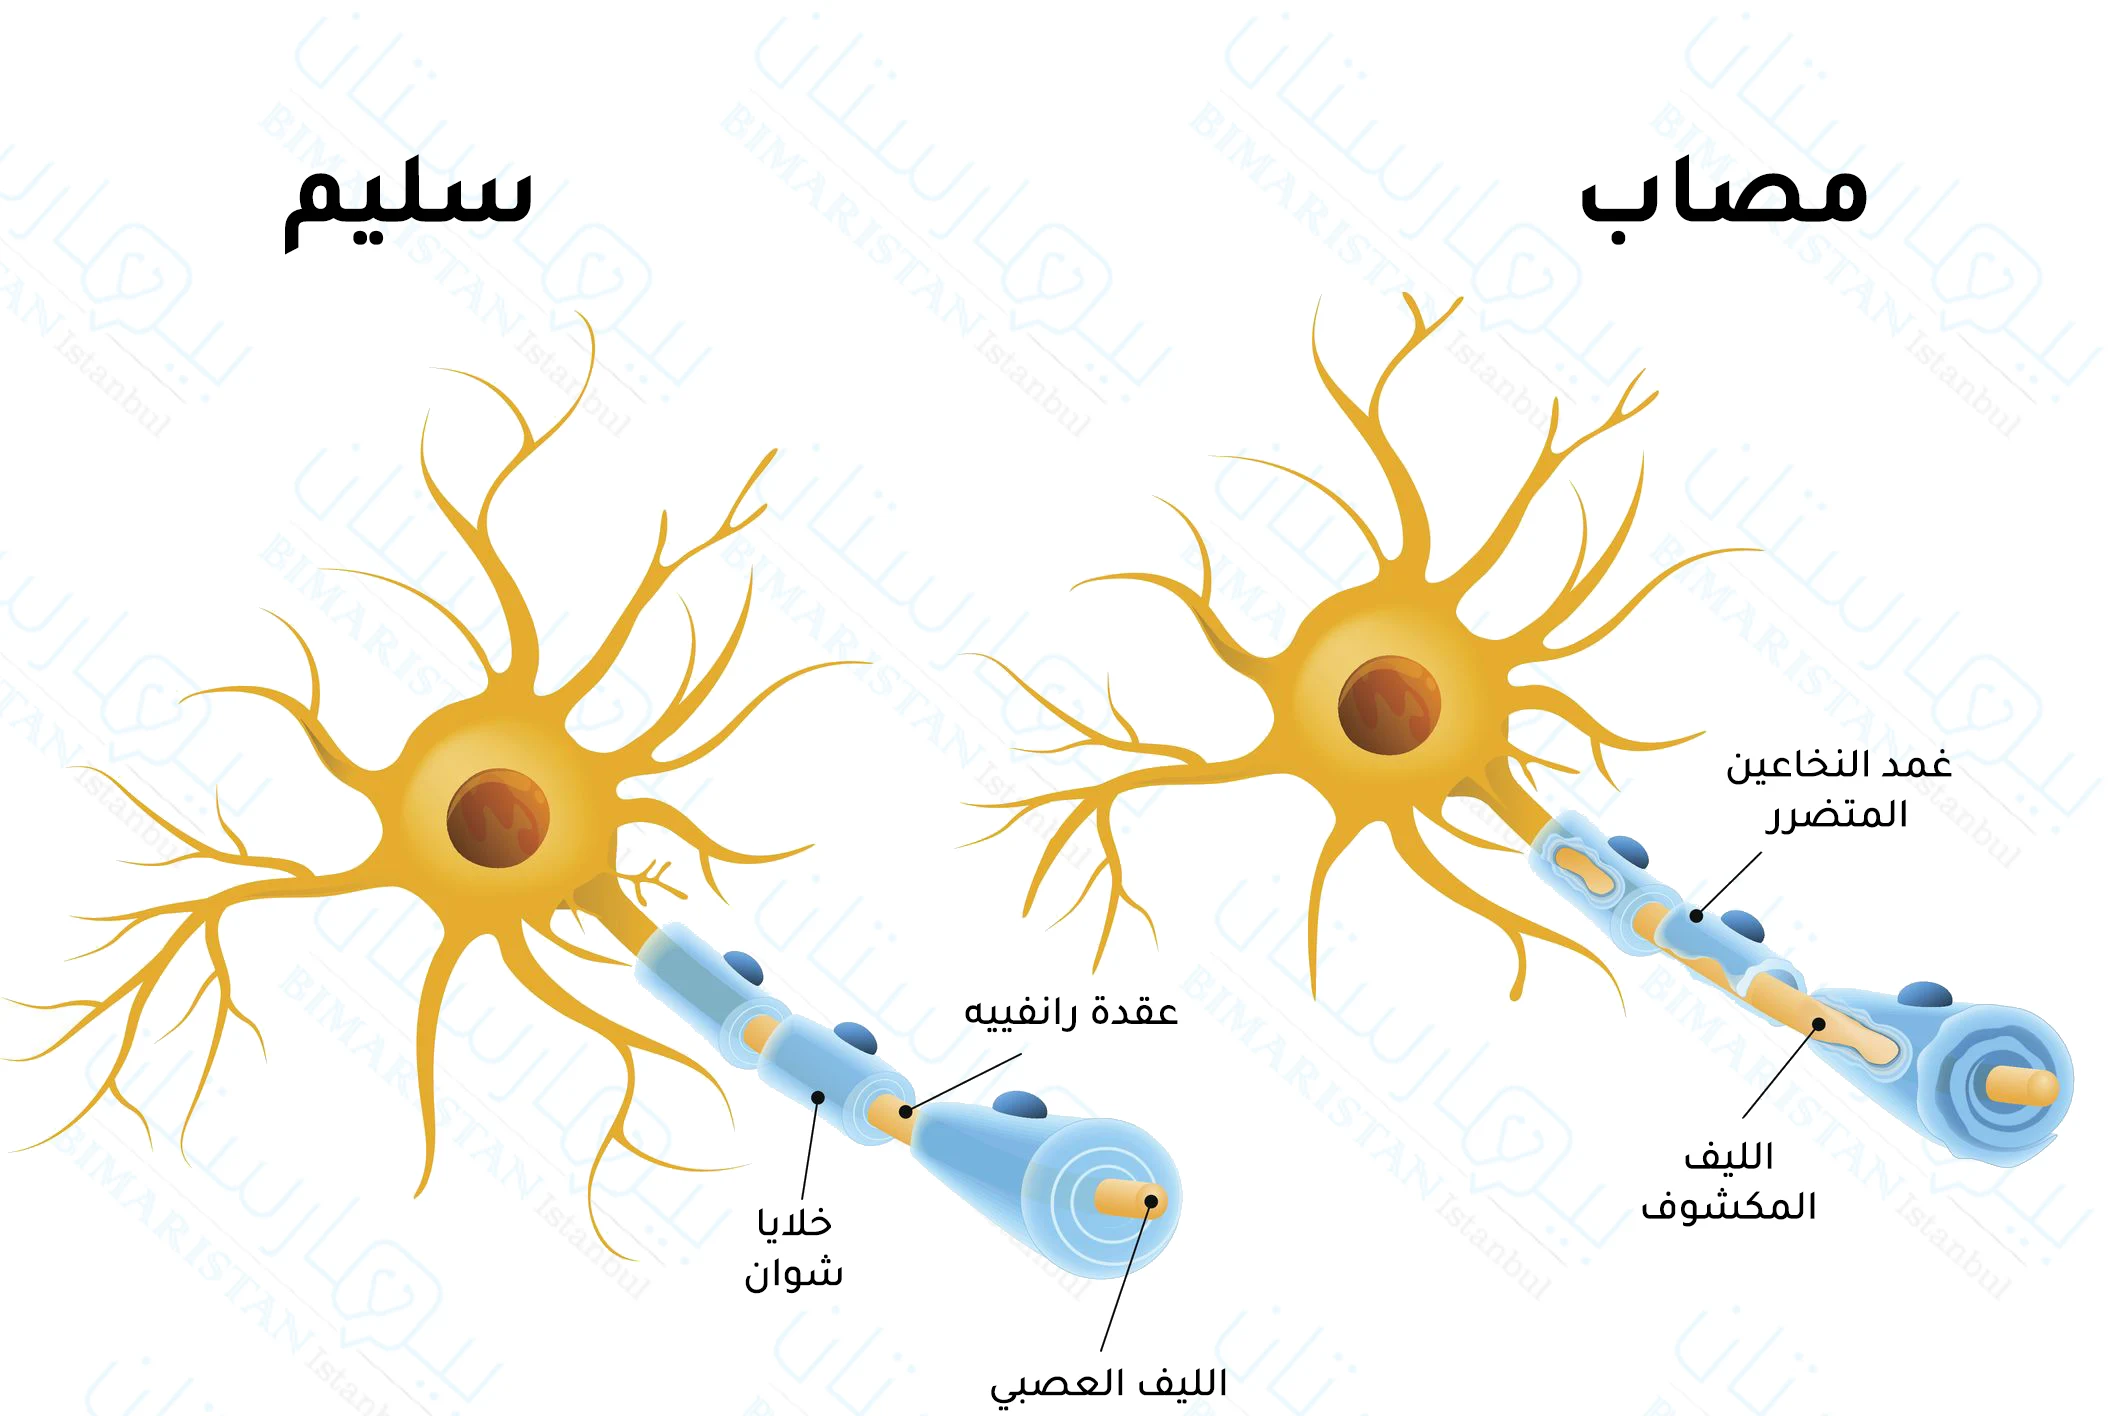 An image showing the mechanism of multiple sclerosis and how the body's immunity attacks the nerve fiber sheaths